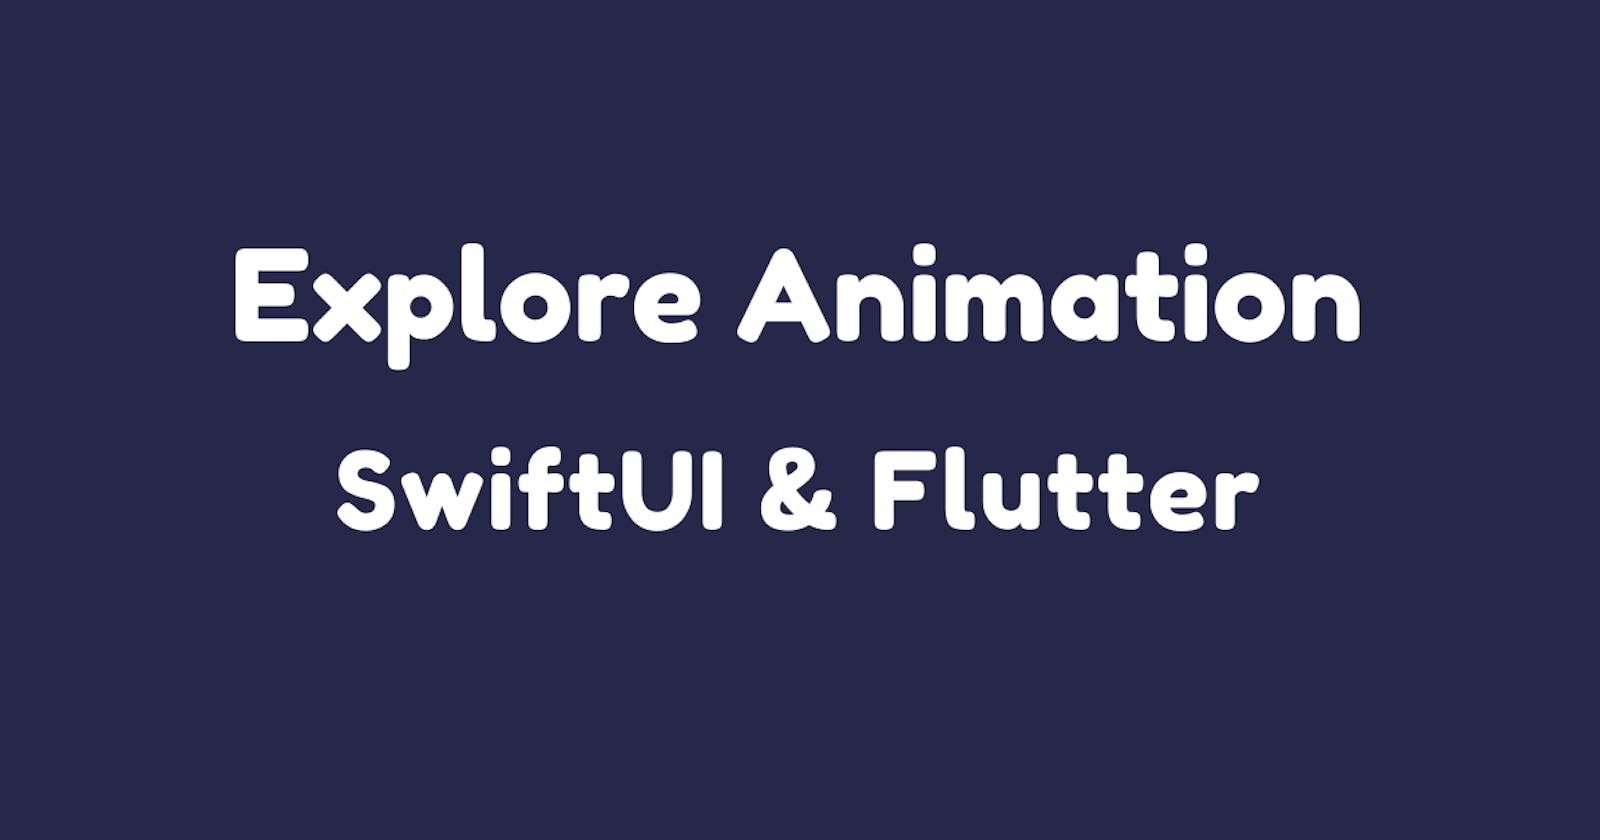 Explore Animation in SwiftUI & Flutter - Introduction